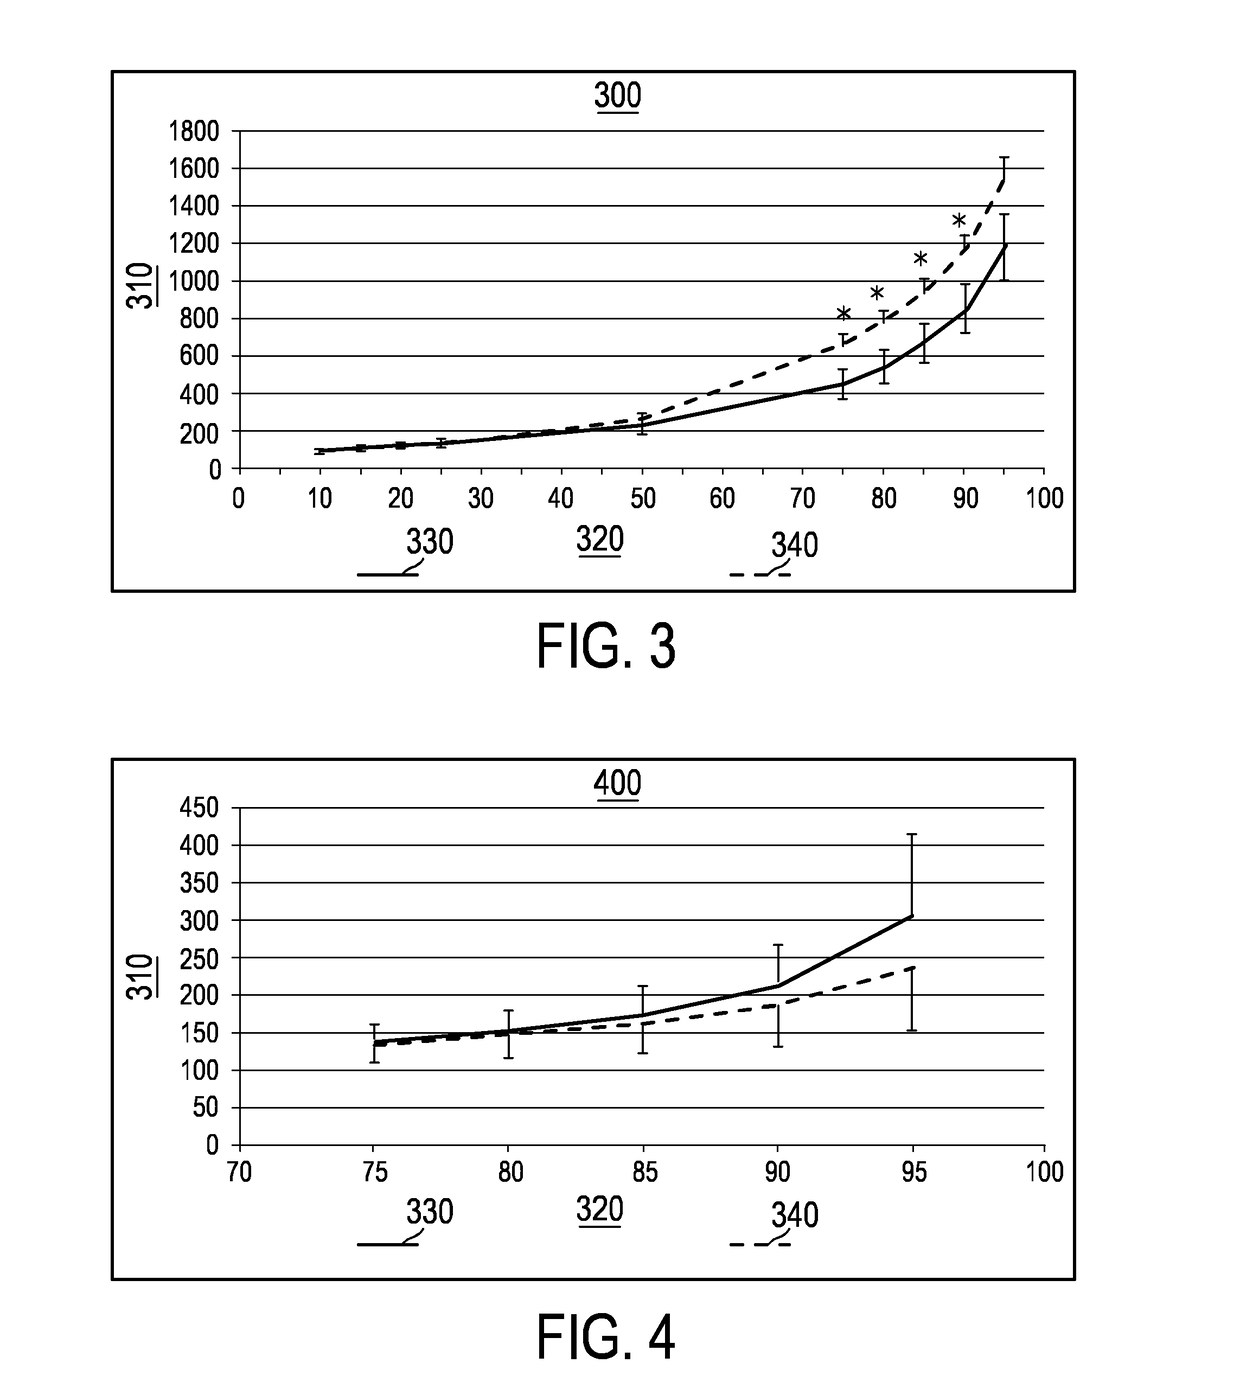 Apparatus, system, method and computer program for assessing the risk of an exacerbation and/or hospitalization